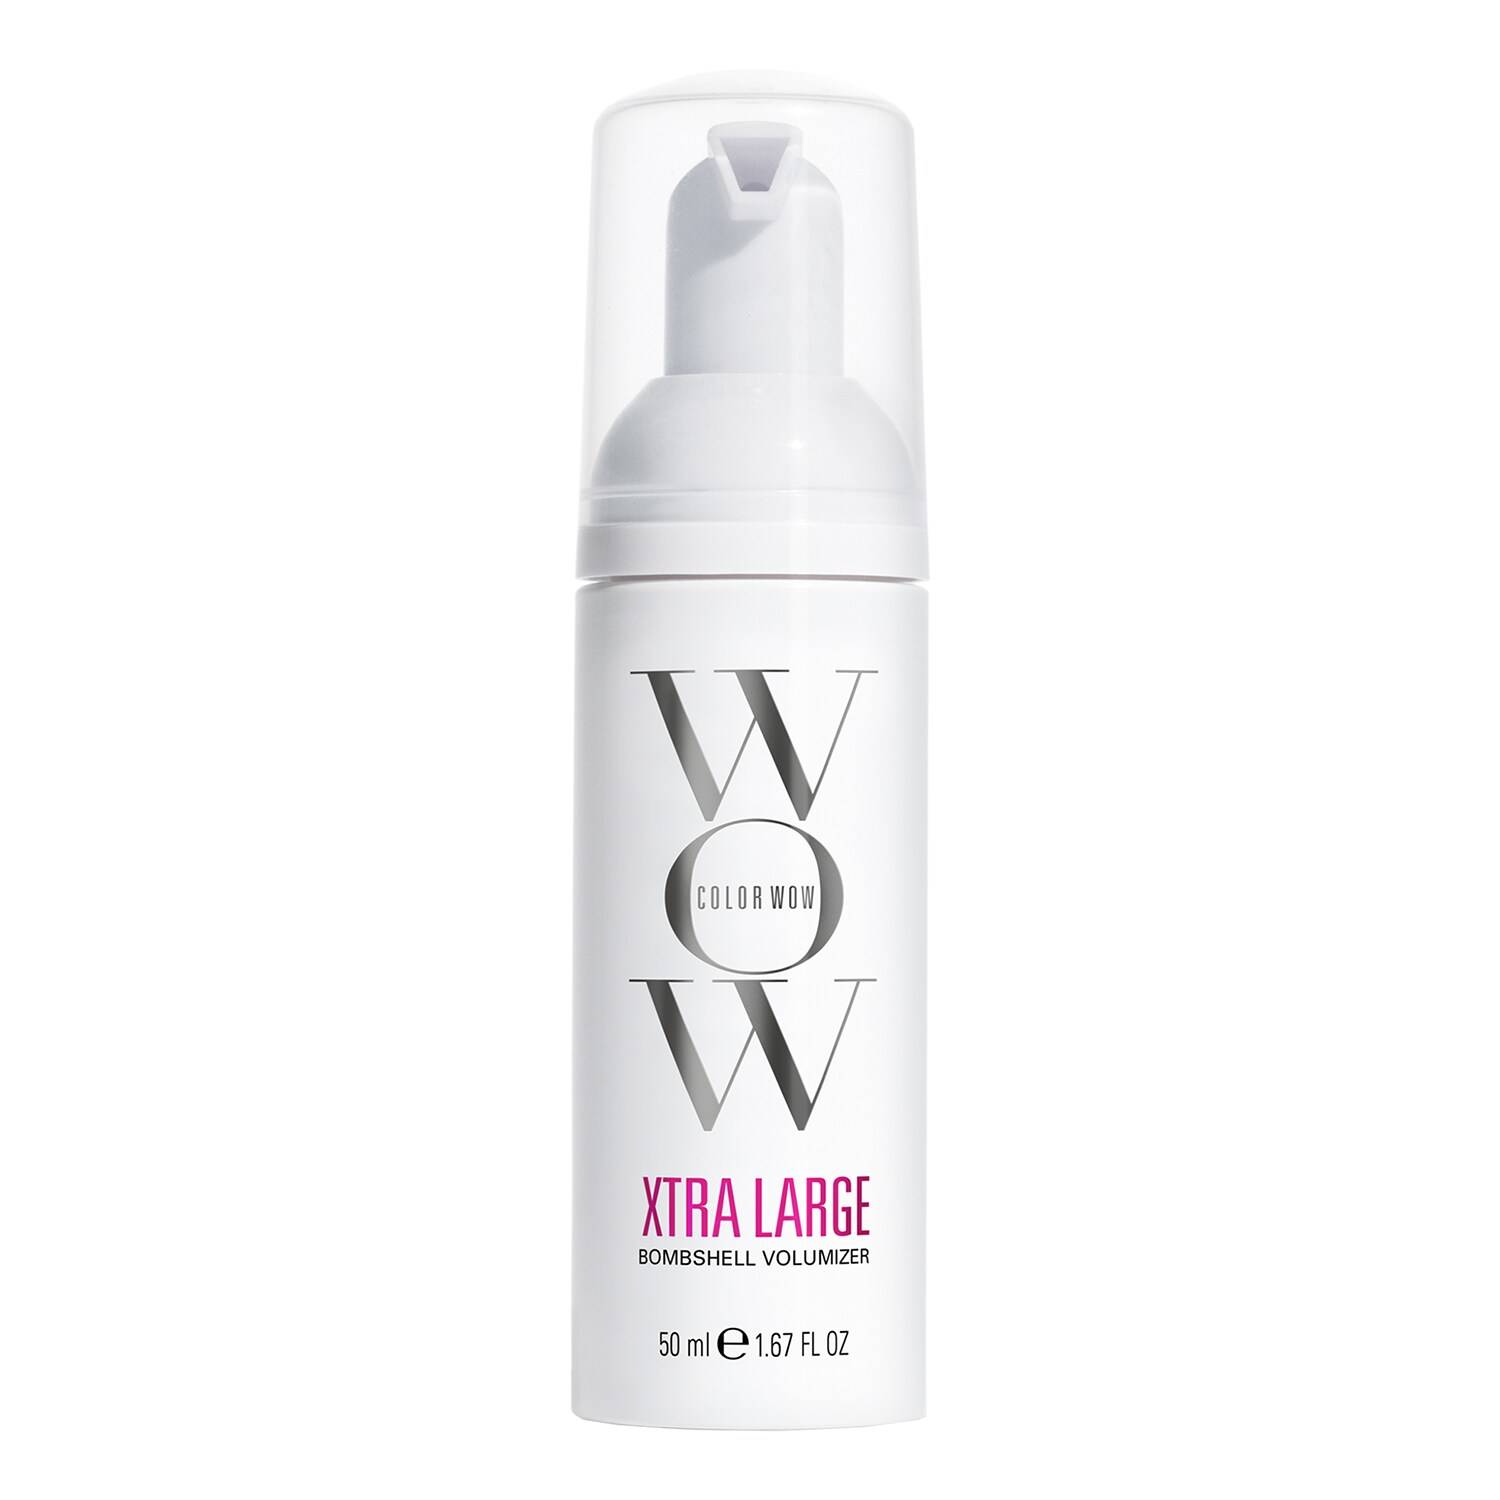 COLOR WOW Xtra Large Travel Size 50ml